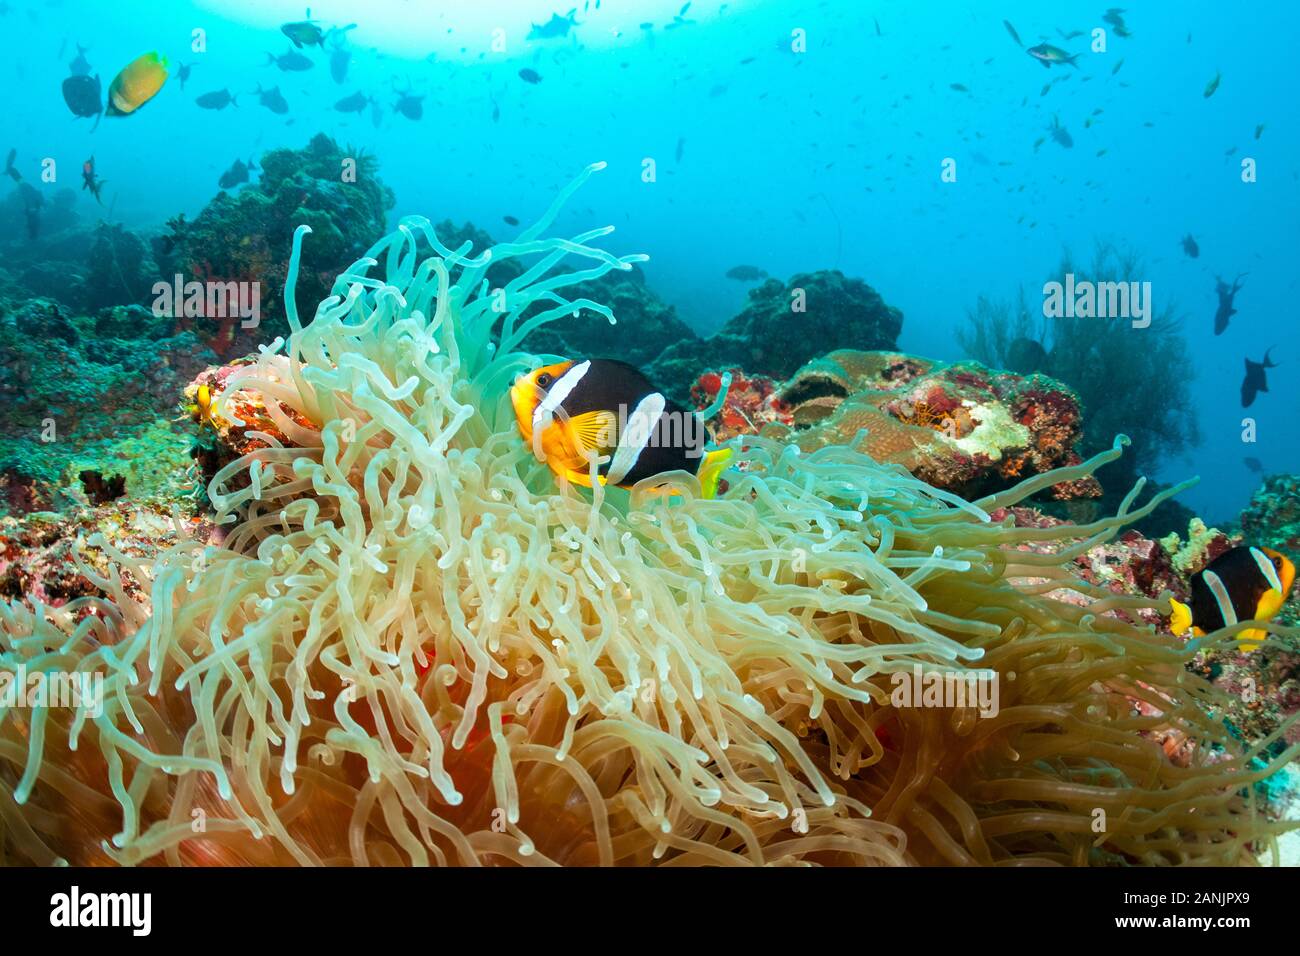 sebae clownfish, or yellow-tail anemonefish, Amphiprion sebae, and their host magnificent sea anemone, Heteractis magnifica, Maldives, Indian Ocean Stock Photo